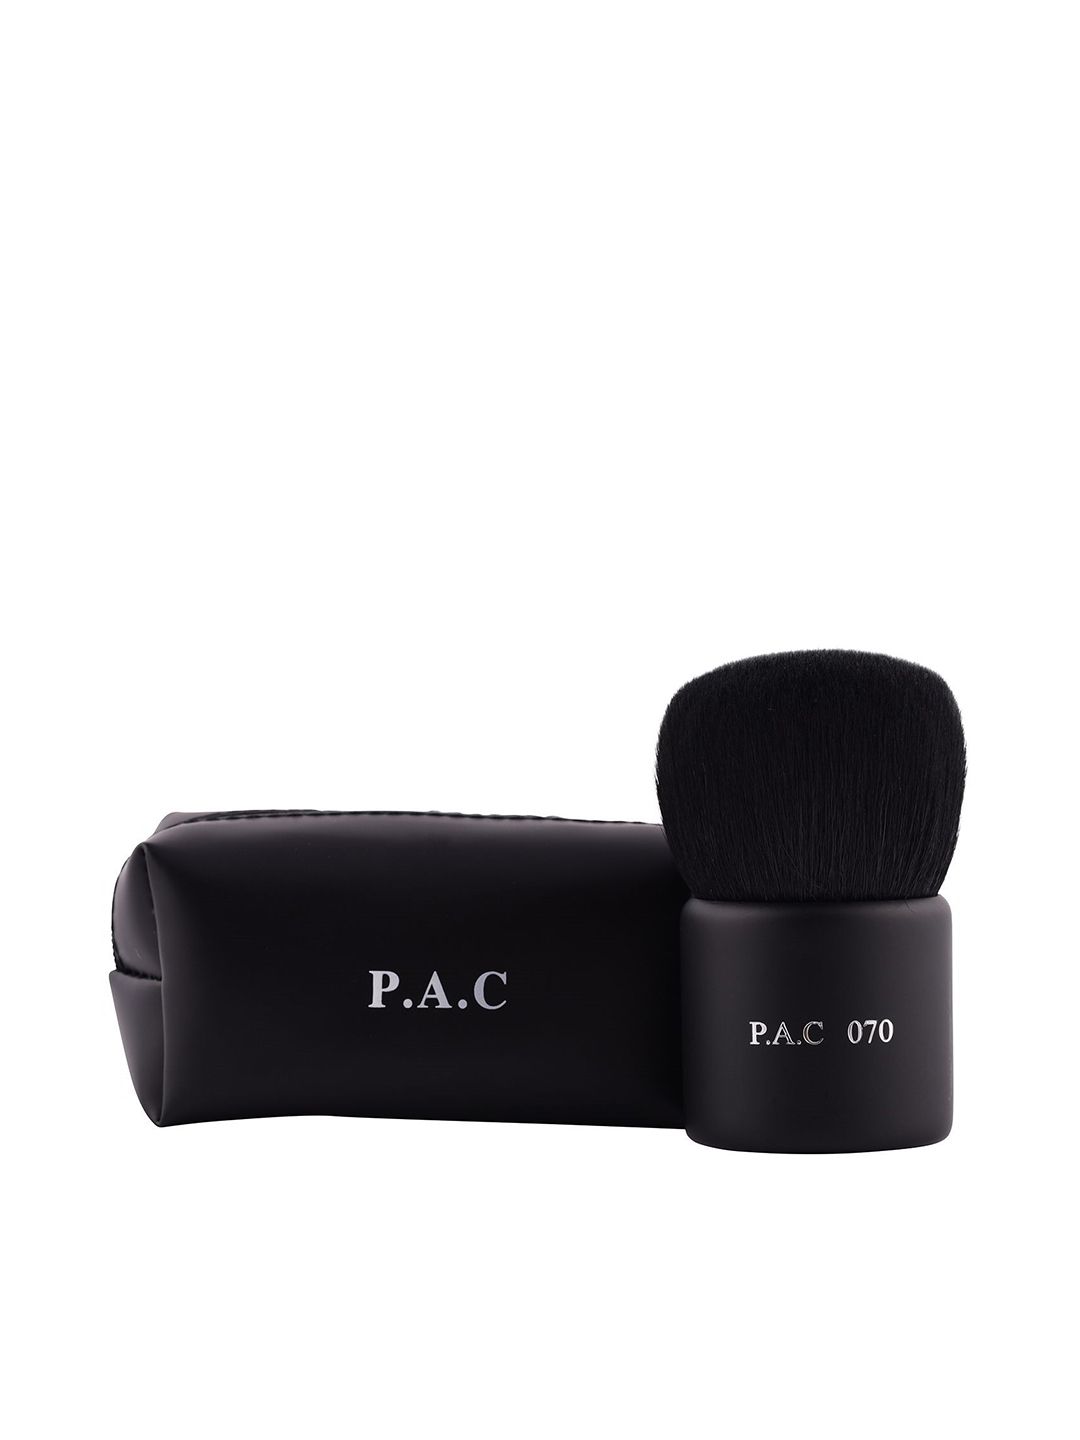 PAC Black Powder Brush with Pouch - 070 Price in India